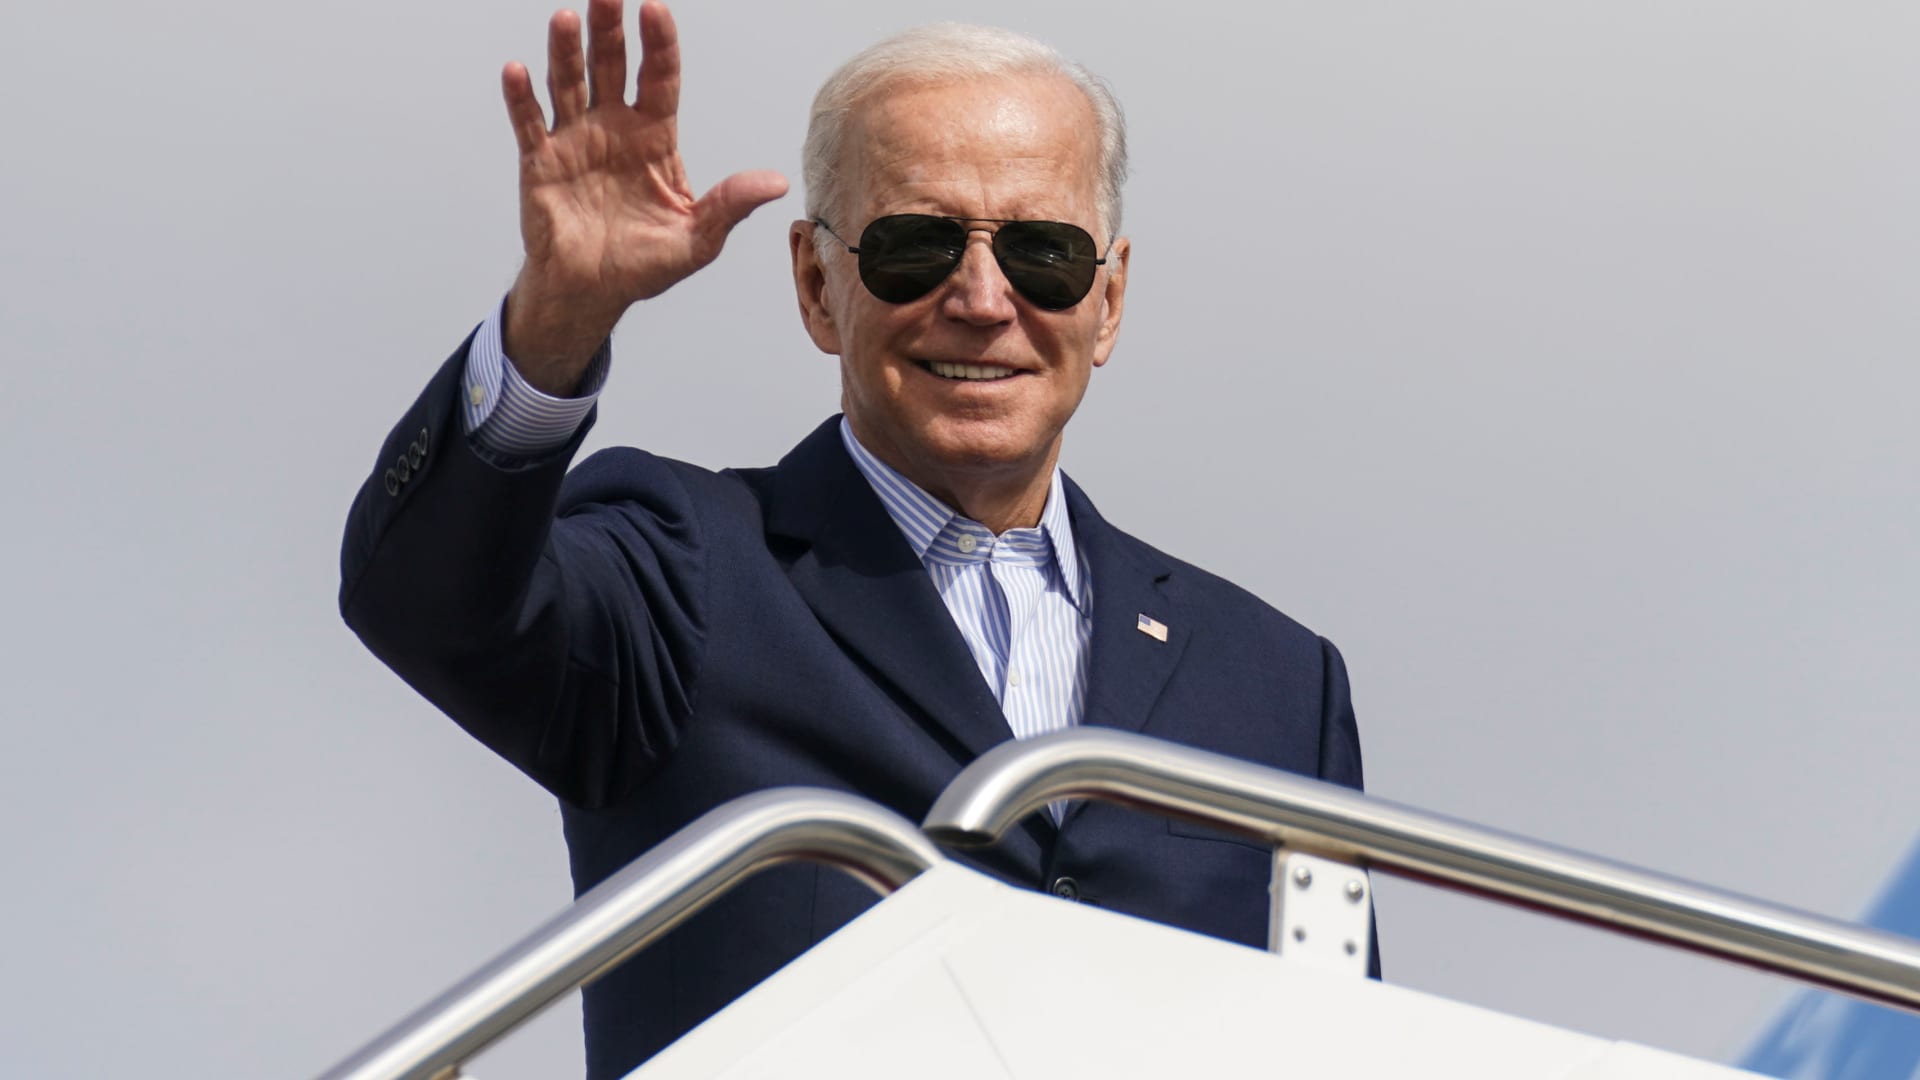 U.S. President Joe Biden boards Air Force One as he departs Washington on travel to Italy from Joint Base Andrews, Maryland, October 28, 2021.